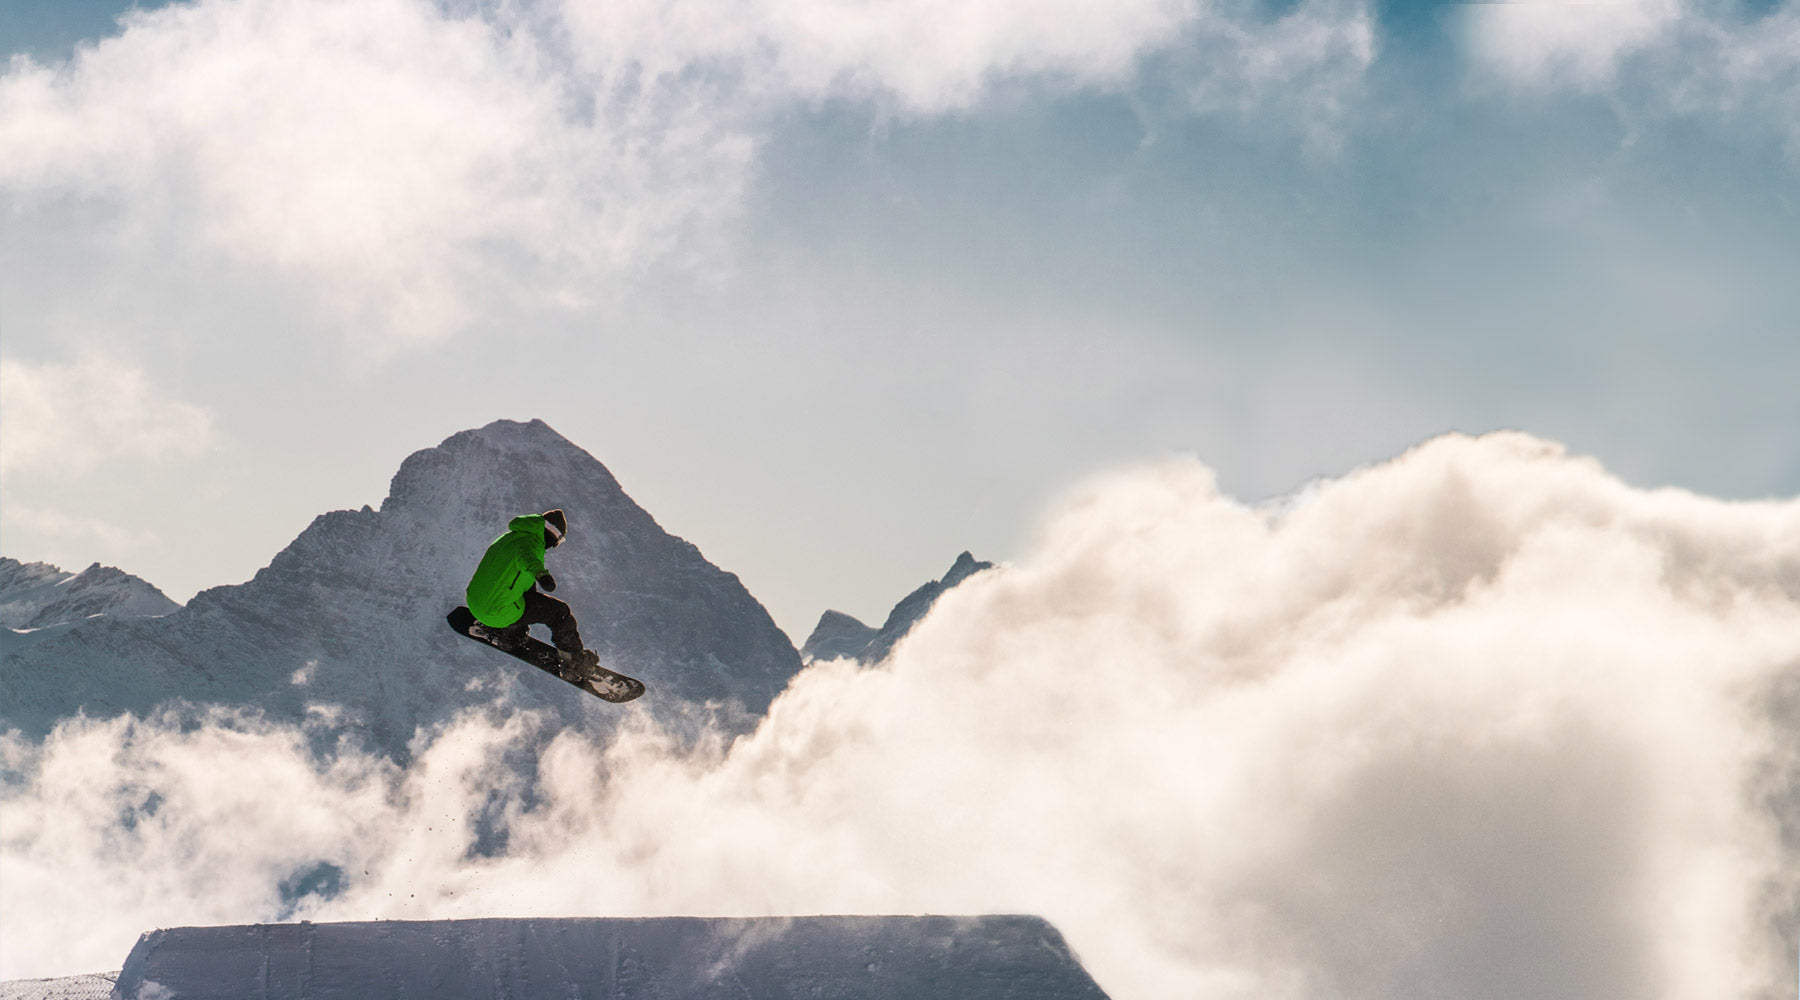 Snowboarder wearing Cloudline socks hitting a large jump with mountains and clouds in the background.